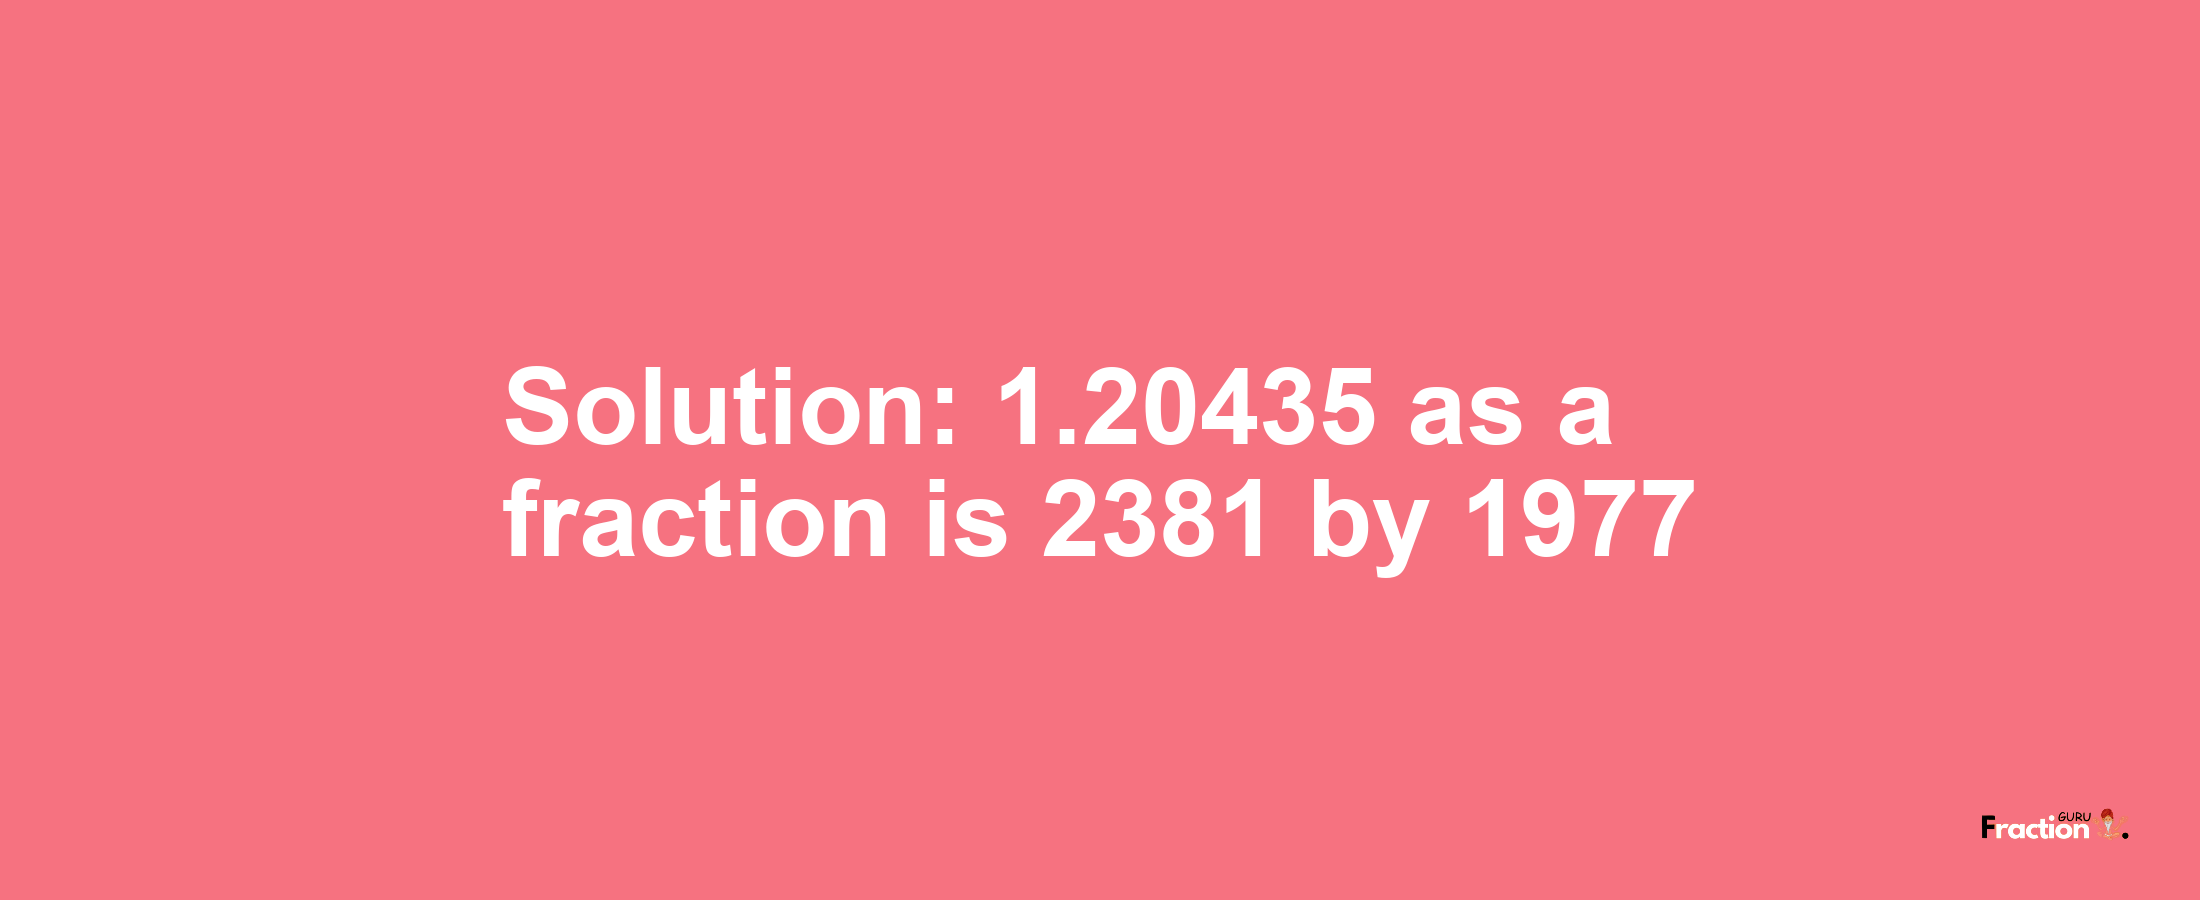 Solution:1.20435 as a fraction is 2381/1977